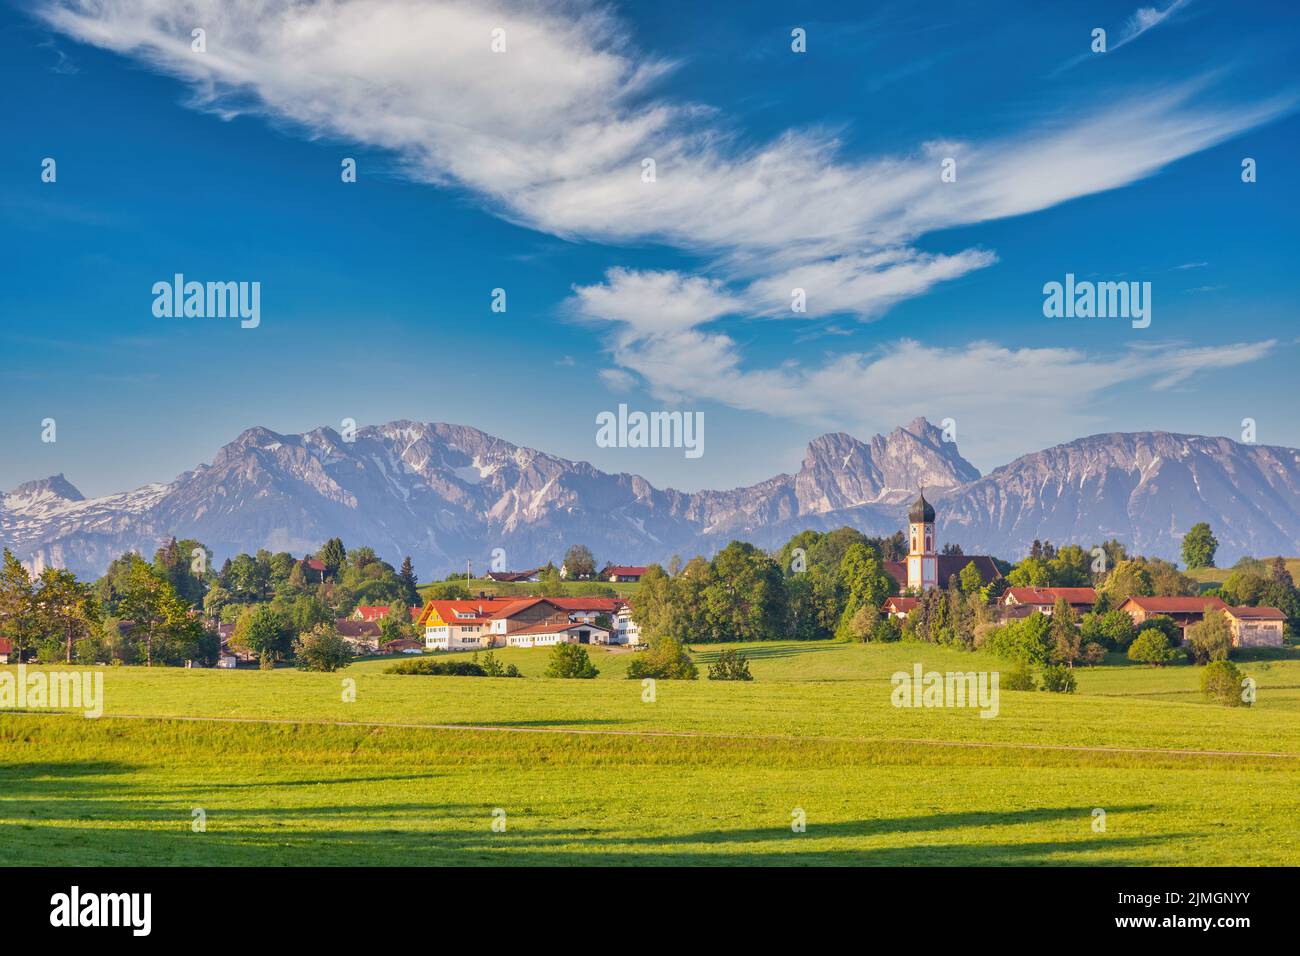 Nature landscape of Alps mountain and countryside village in Bavaria, Germany Stock Photo